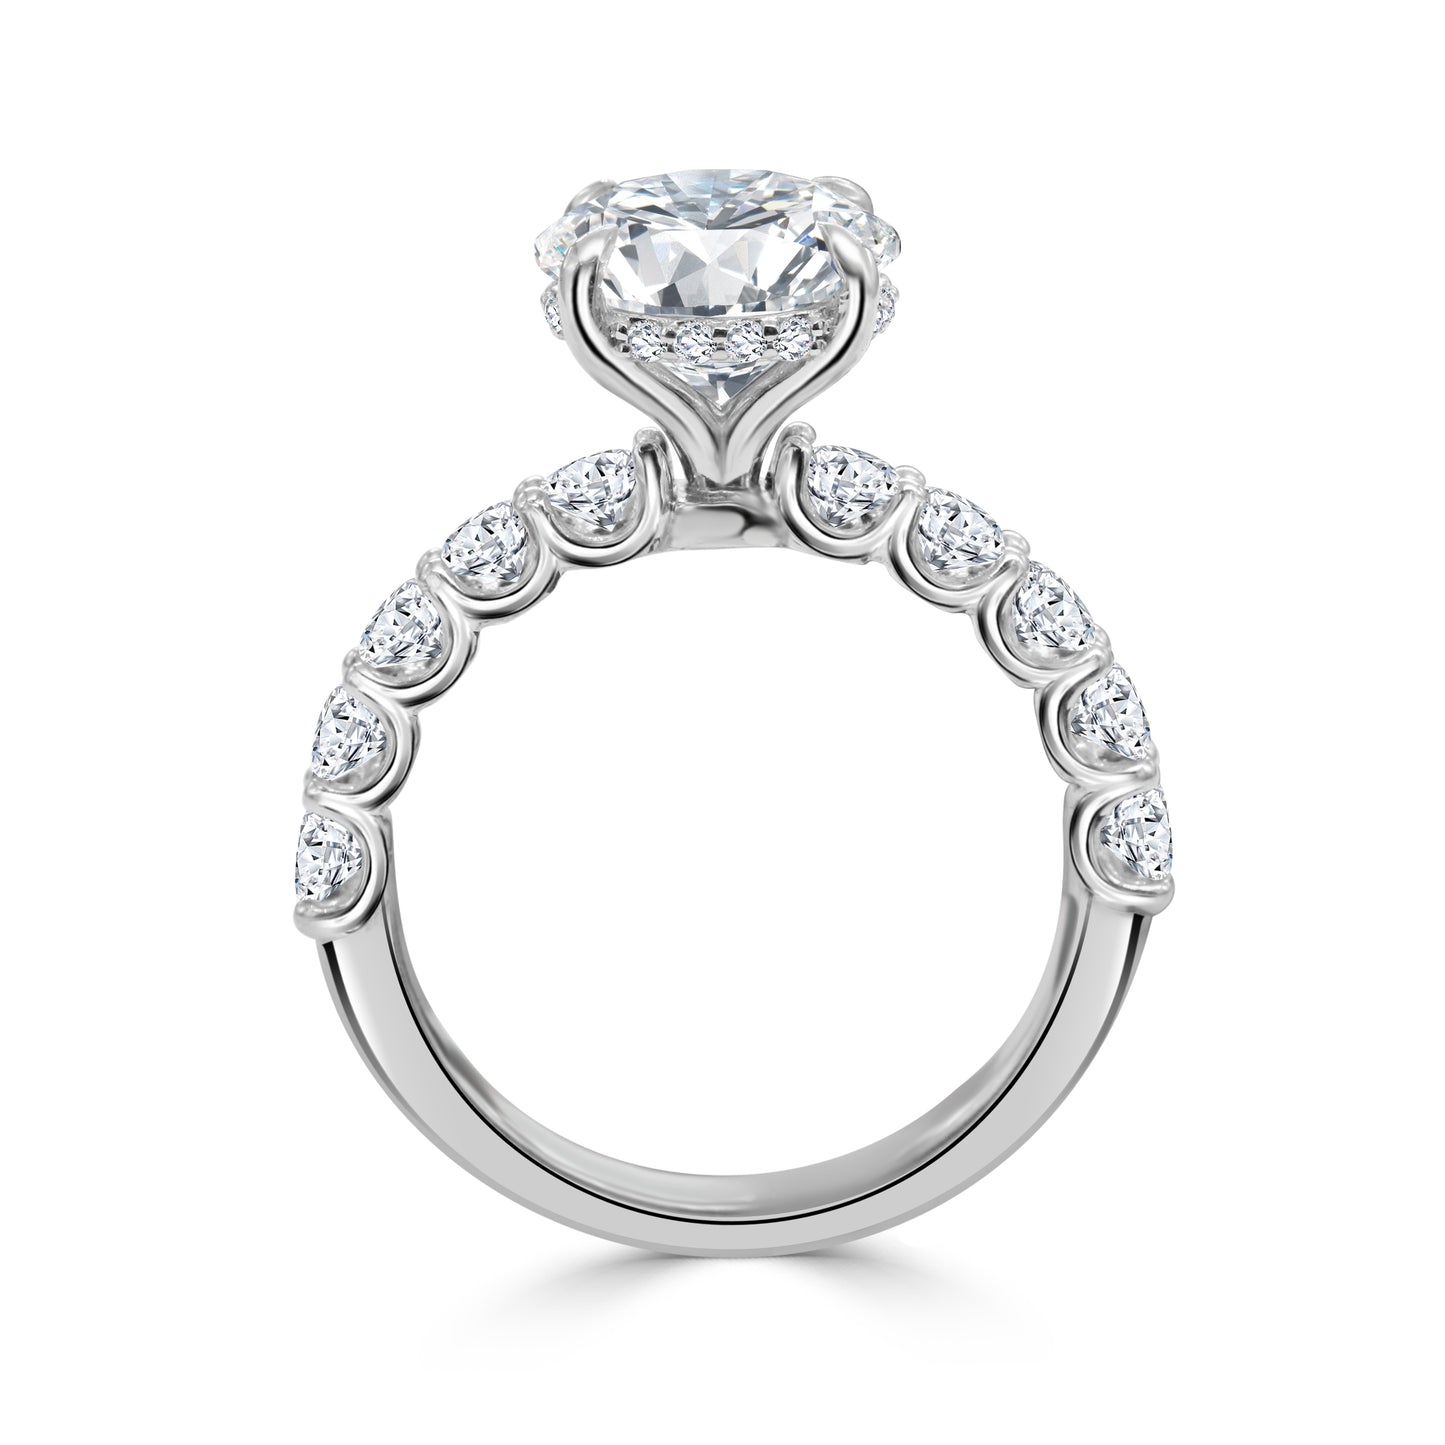 3.02ct Round Brilliant cut lab grown diamond engagement ring - 18ct White Gold ladies engagement ring set with diamonds on a halo and band